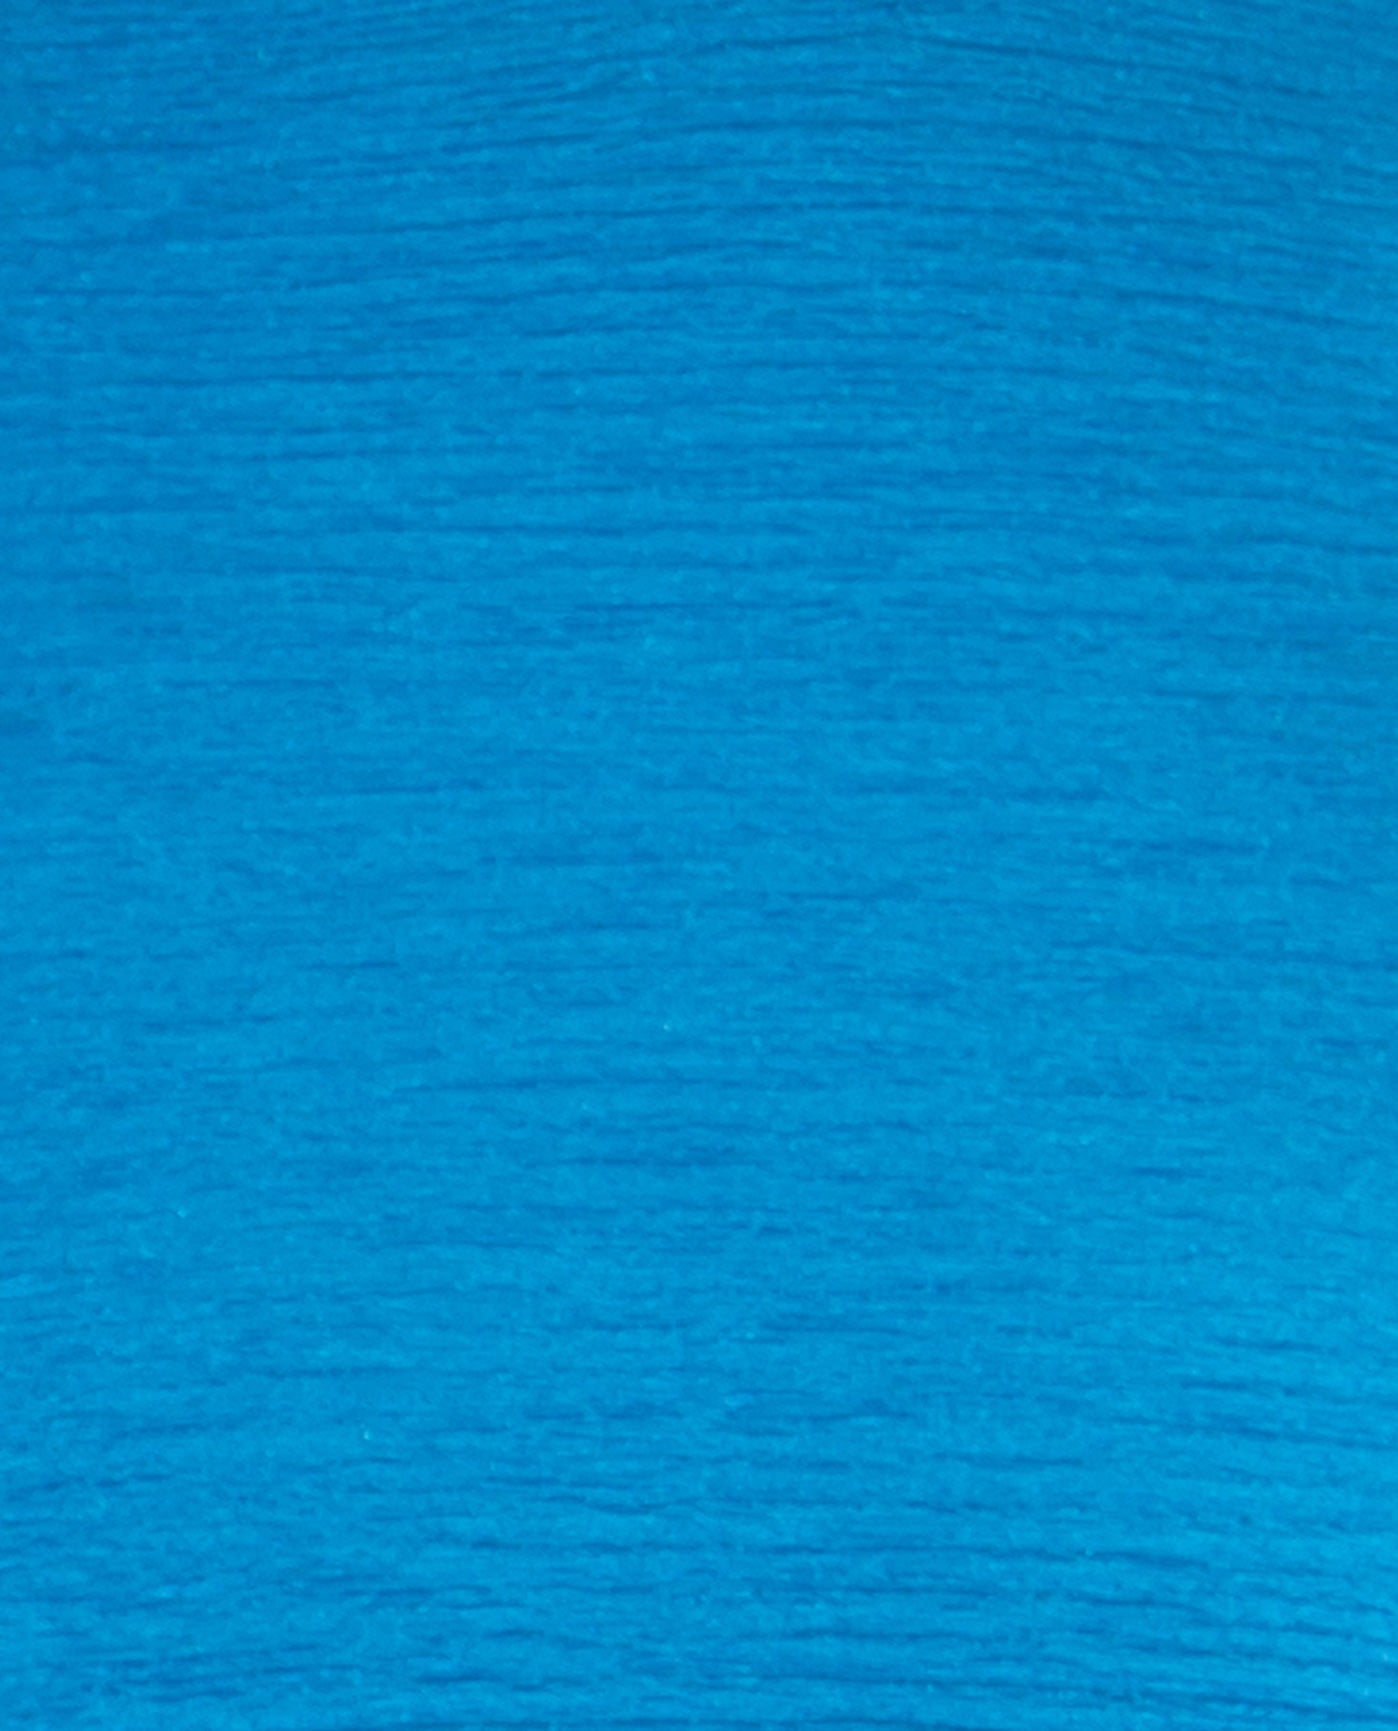 FABRIC SWATCH VIEW OF CHLORINE RESISTANT KRINKLE TEXTURED SOLID HIGH NECK ONE PIECE | KRINKLE SEA